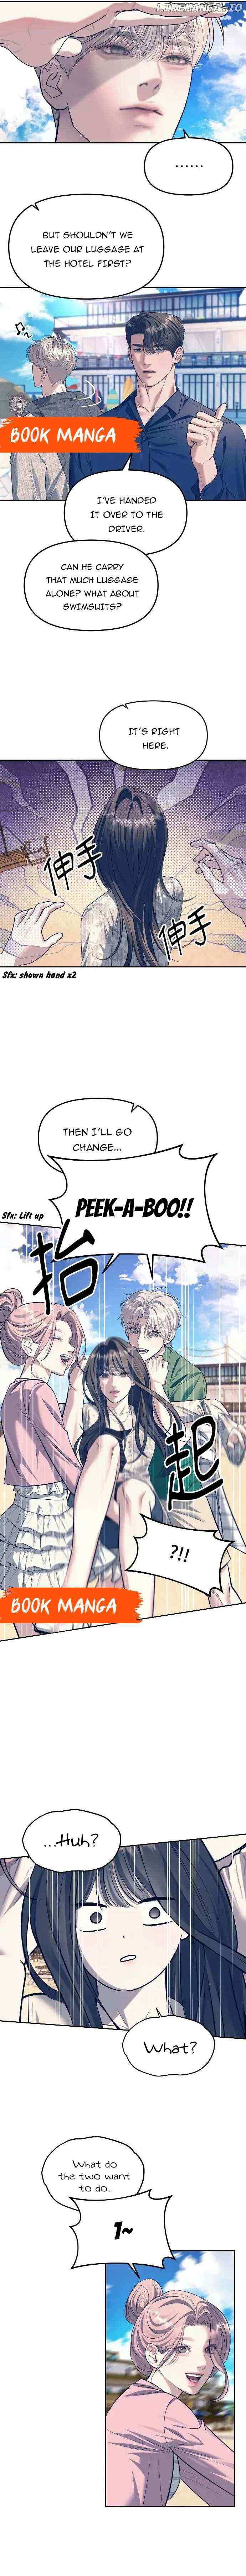 Undercover! Chaebol High School - 63 page 12-ed697756